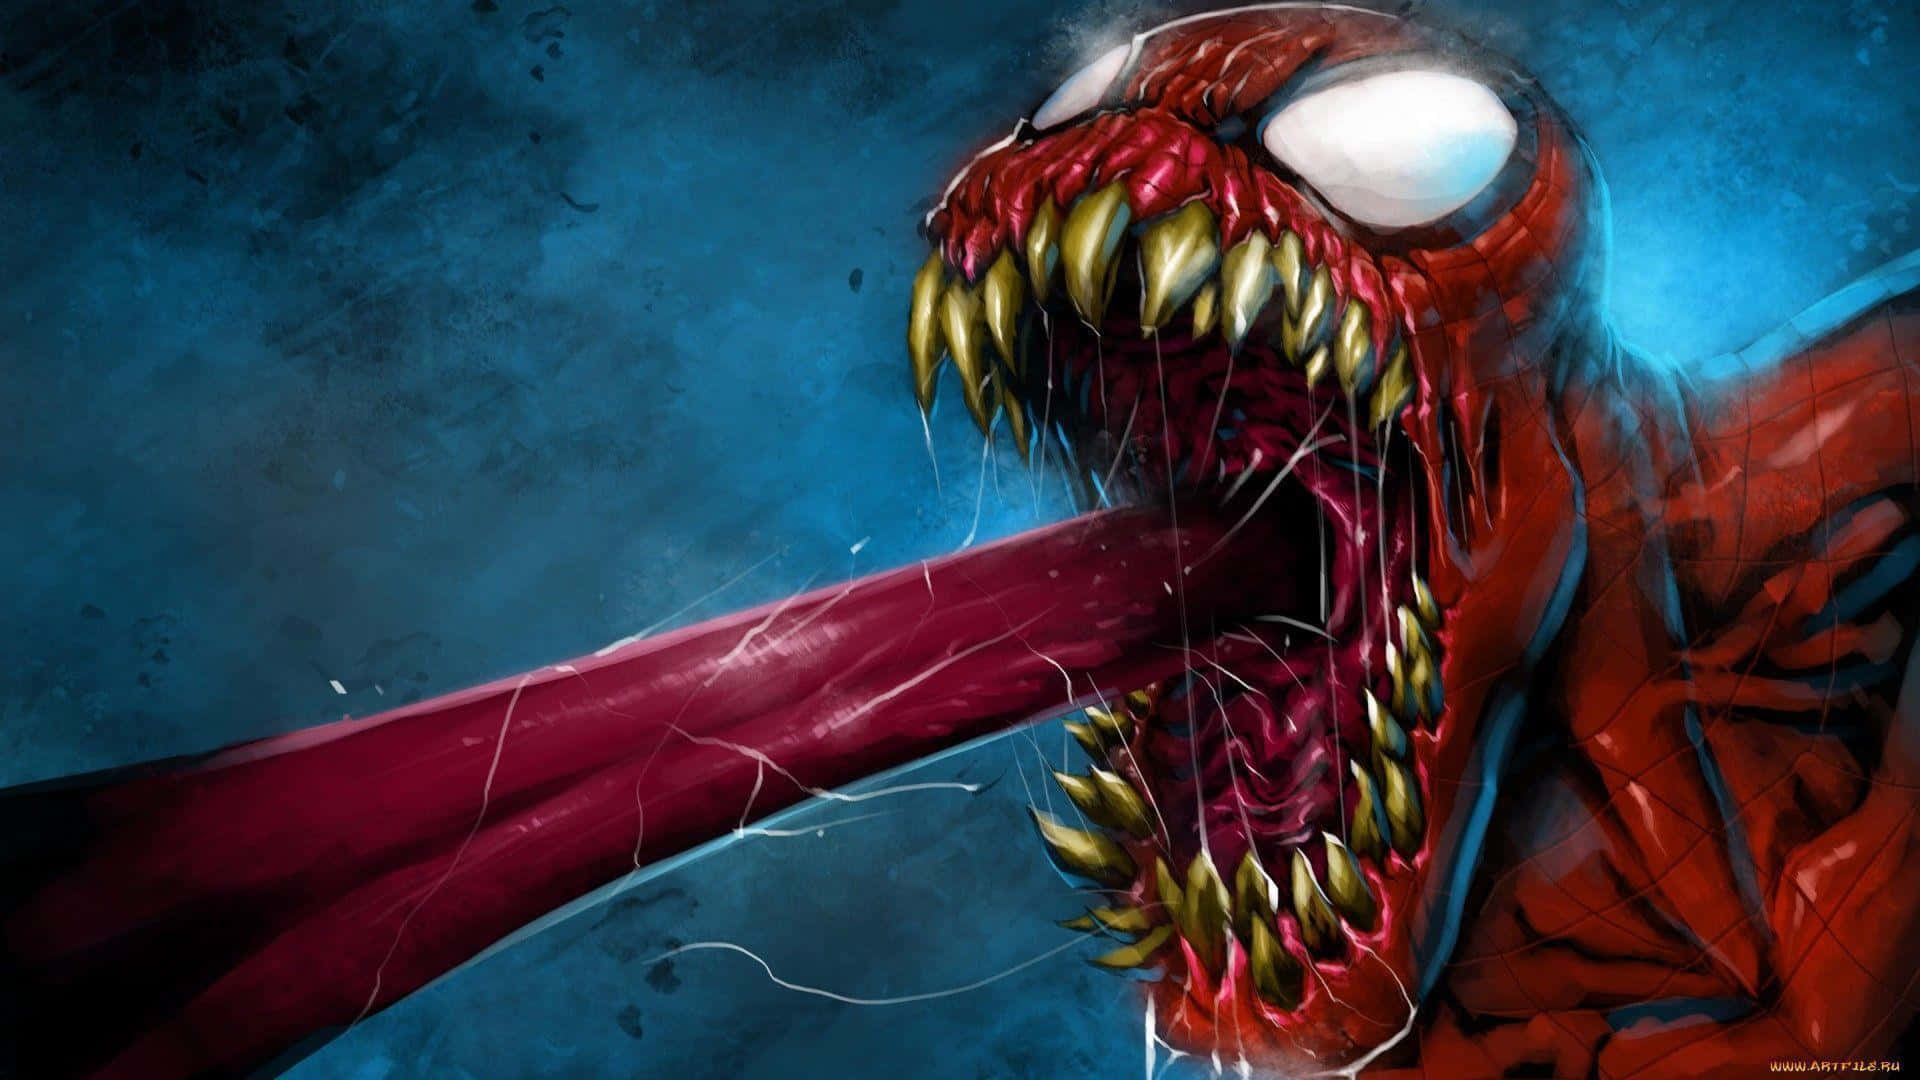 Carnage Unleashed - Fierce Marvel Villain in Action